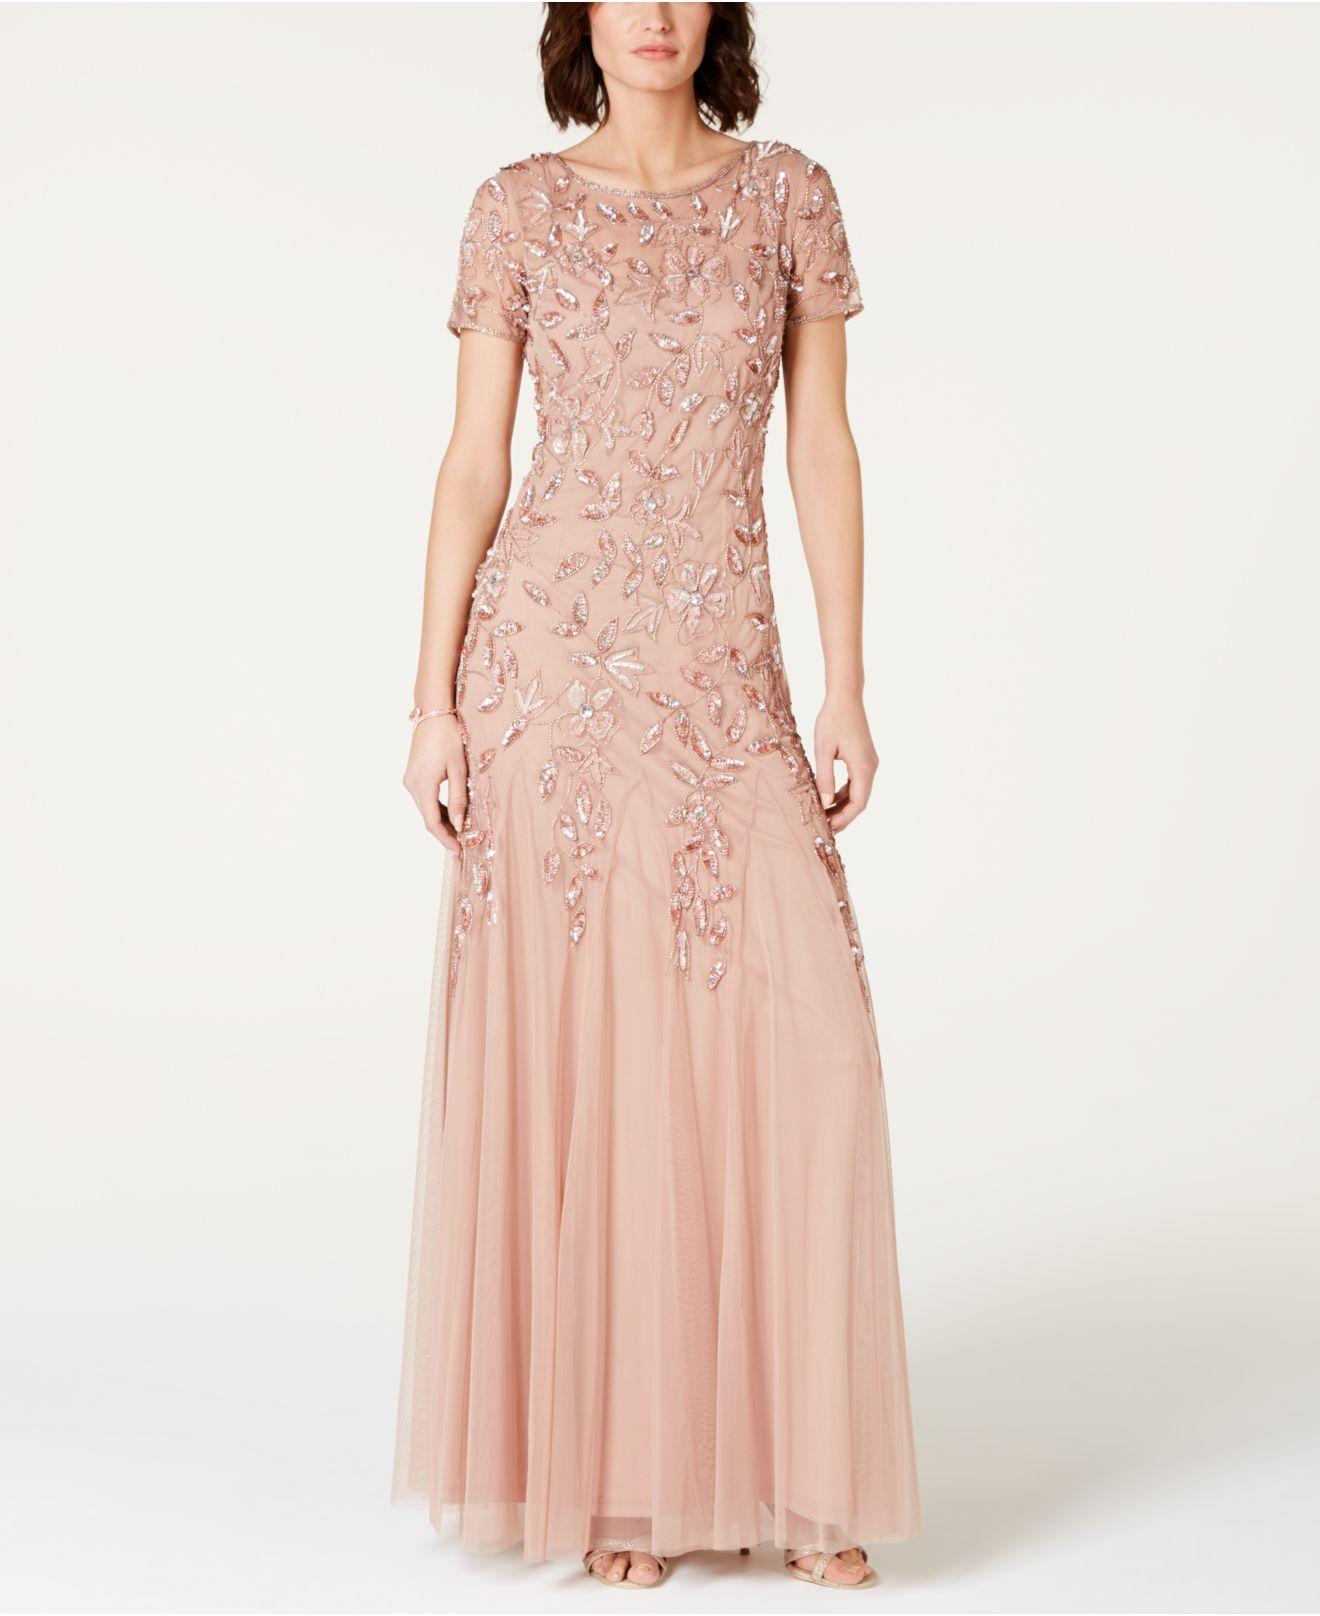 Adrianna Papell Chiffon Floral-design Embellished Gown in Rose Gold (Pink)  - Lyst